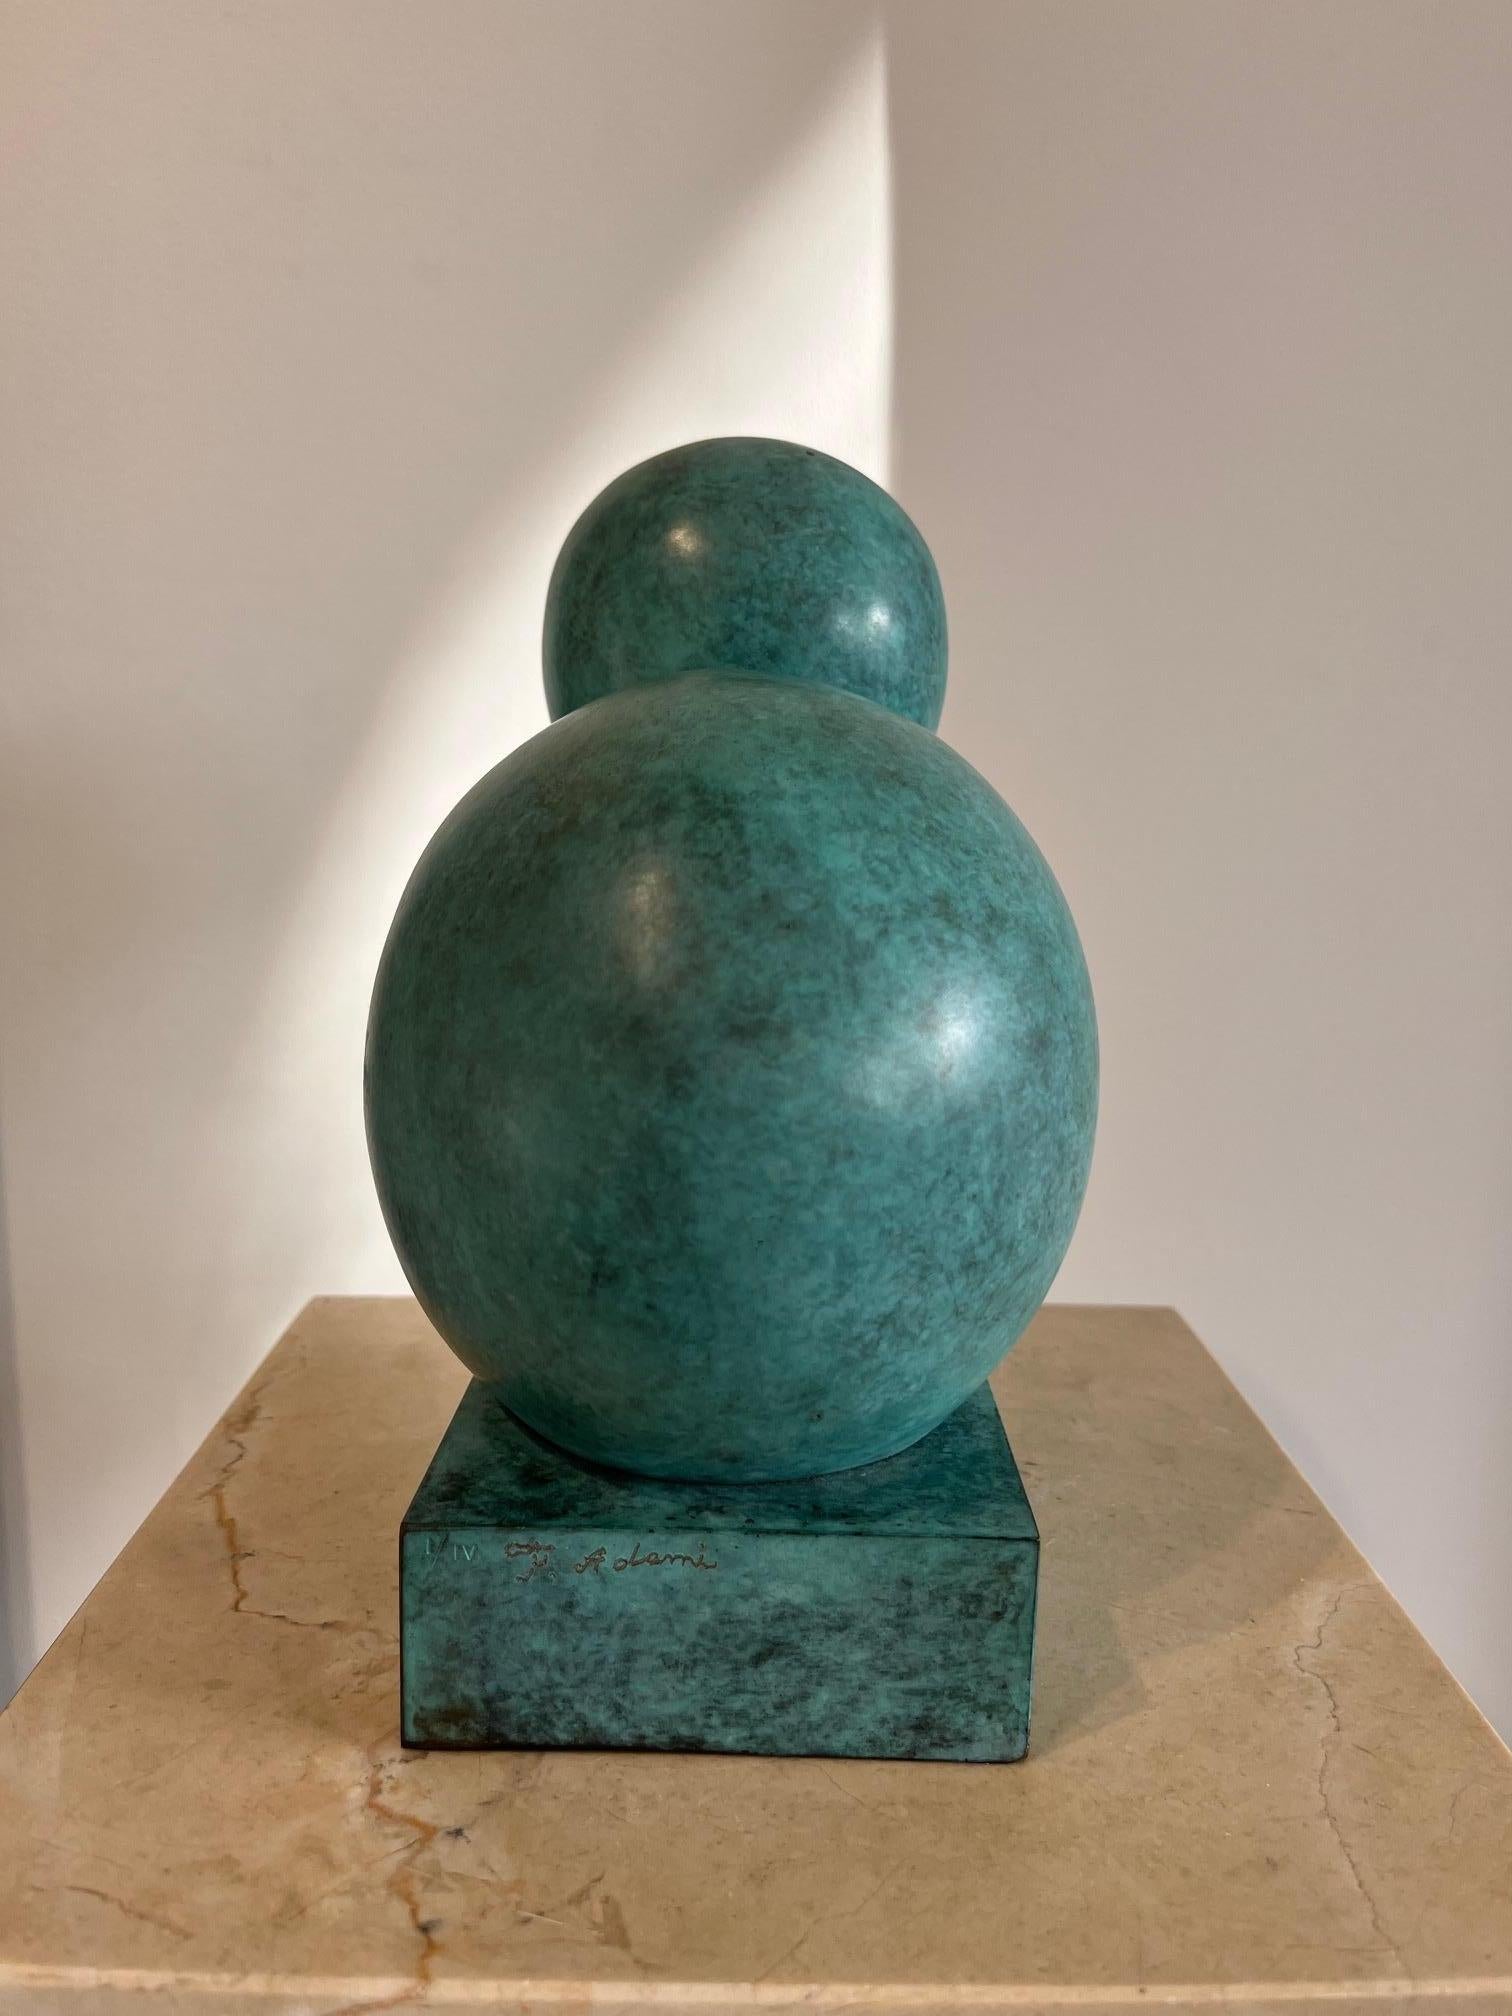 Edition : 1 of 4
Created in 1998
20,5 x 13 x 13 cm


Upon his arrival in Paris in 1957, Adami befriended the sculptors Collamarini and Renato Ischia at the Ecole des Beaux-Arts, and met Ossip Zadkine at the Grande Chaumière, from whom he gained